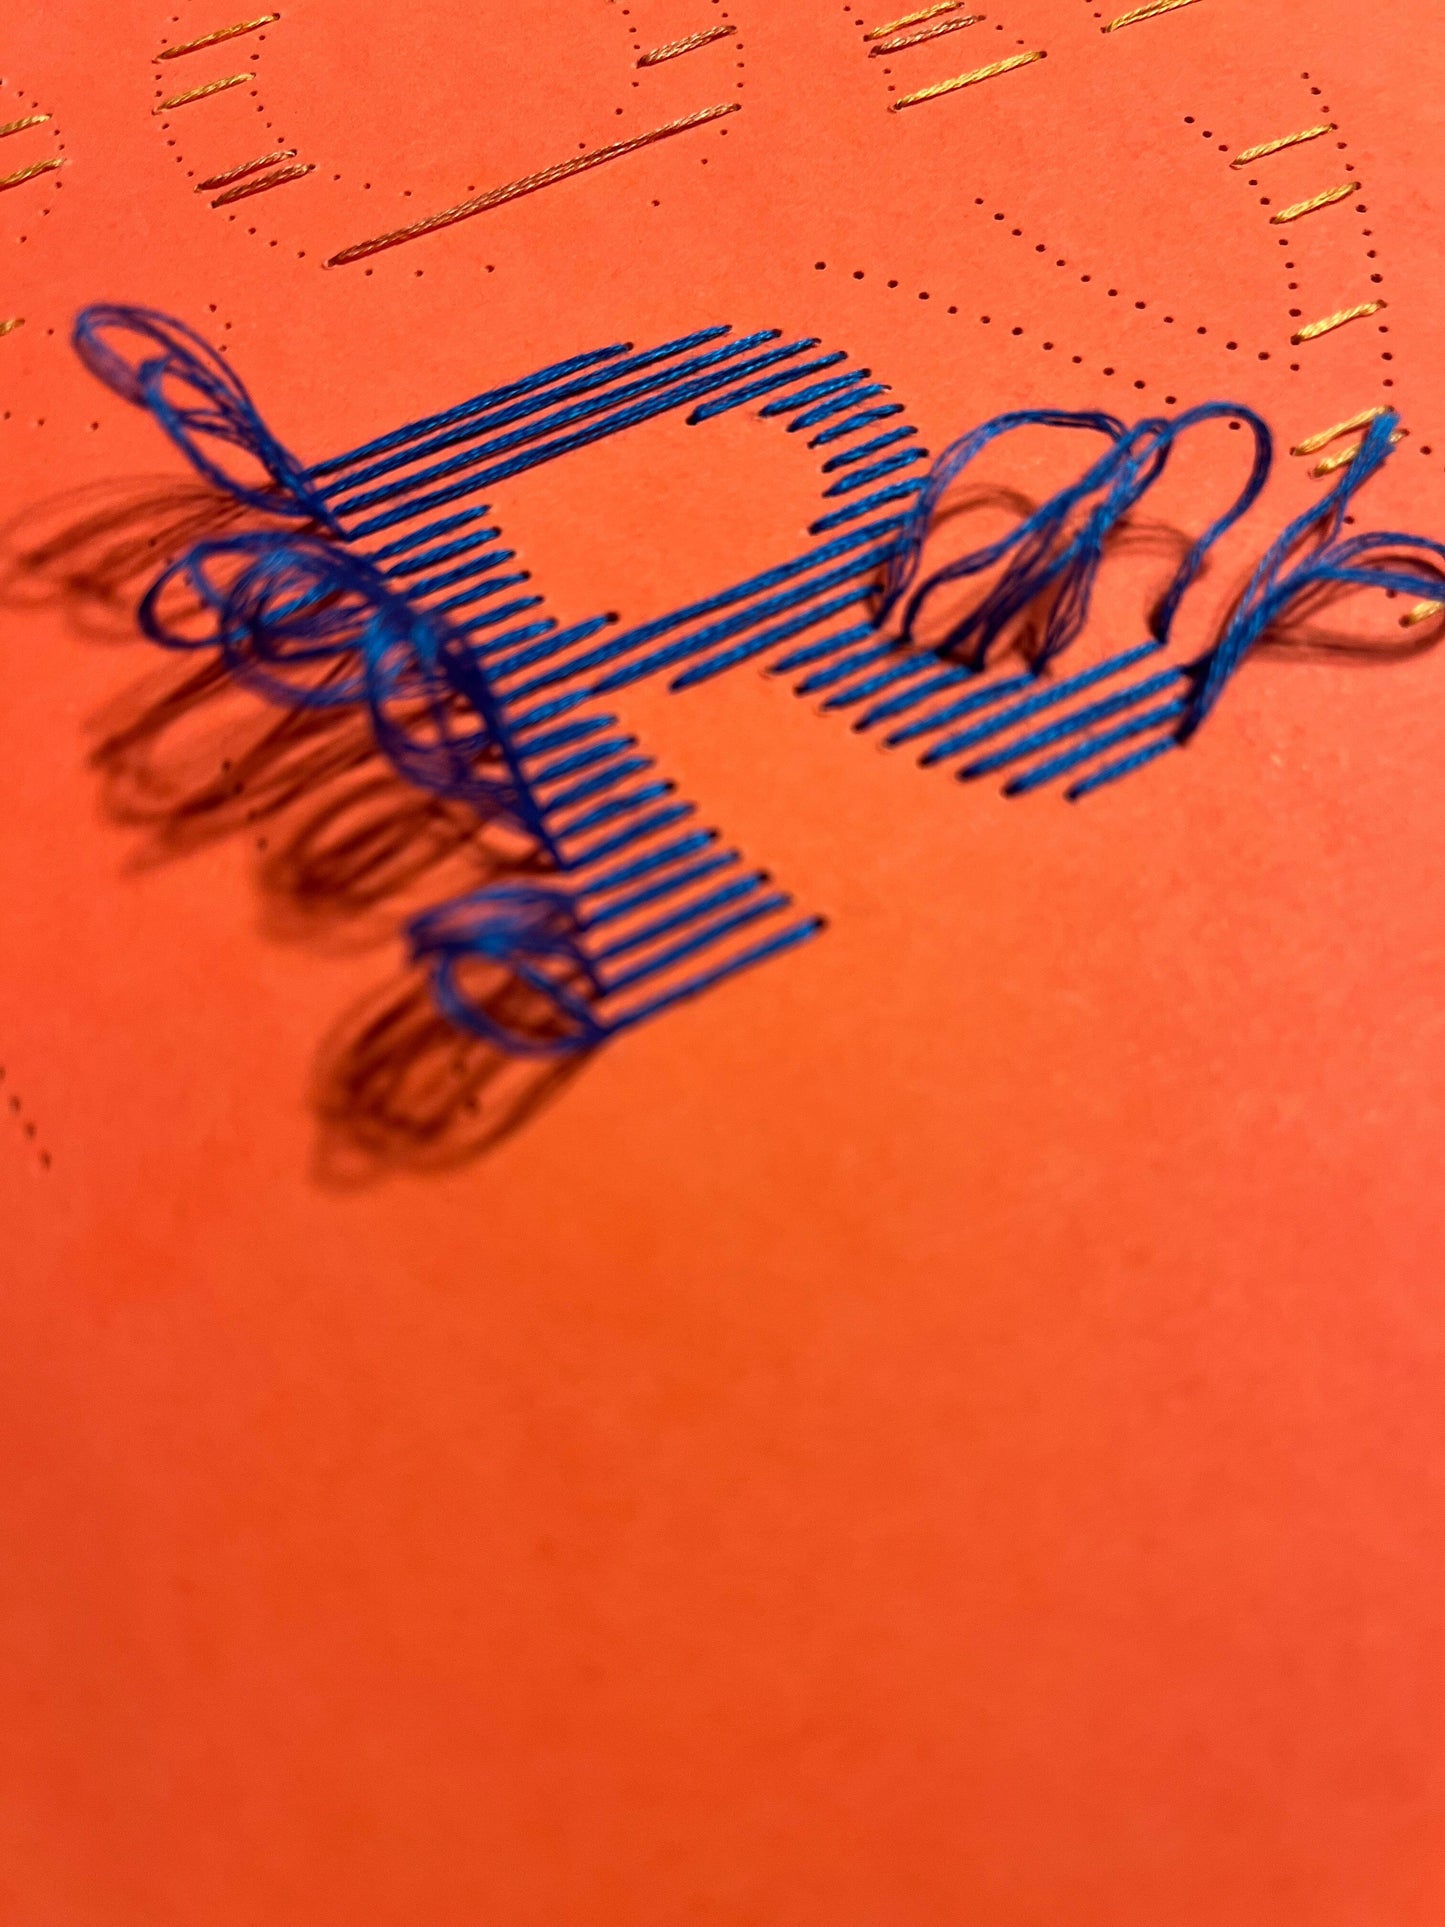 IN-PERSON NYC: Embroidery + Typography Workshop 07/08 - Catalina Escallon